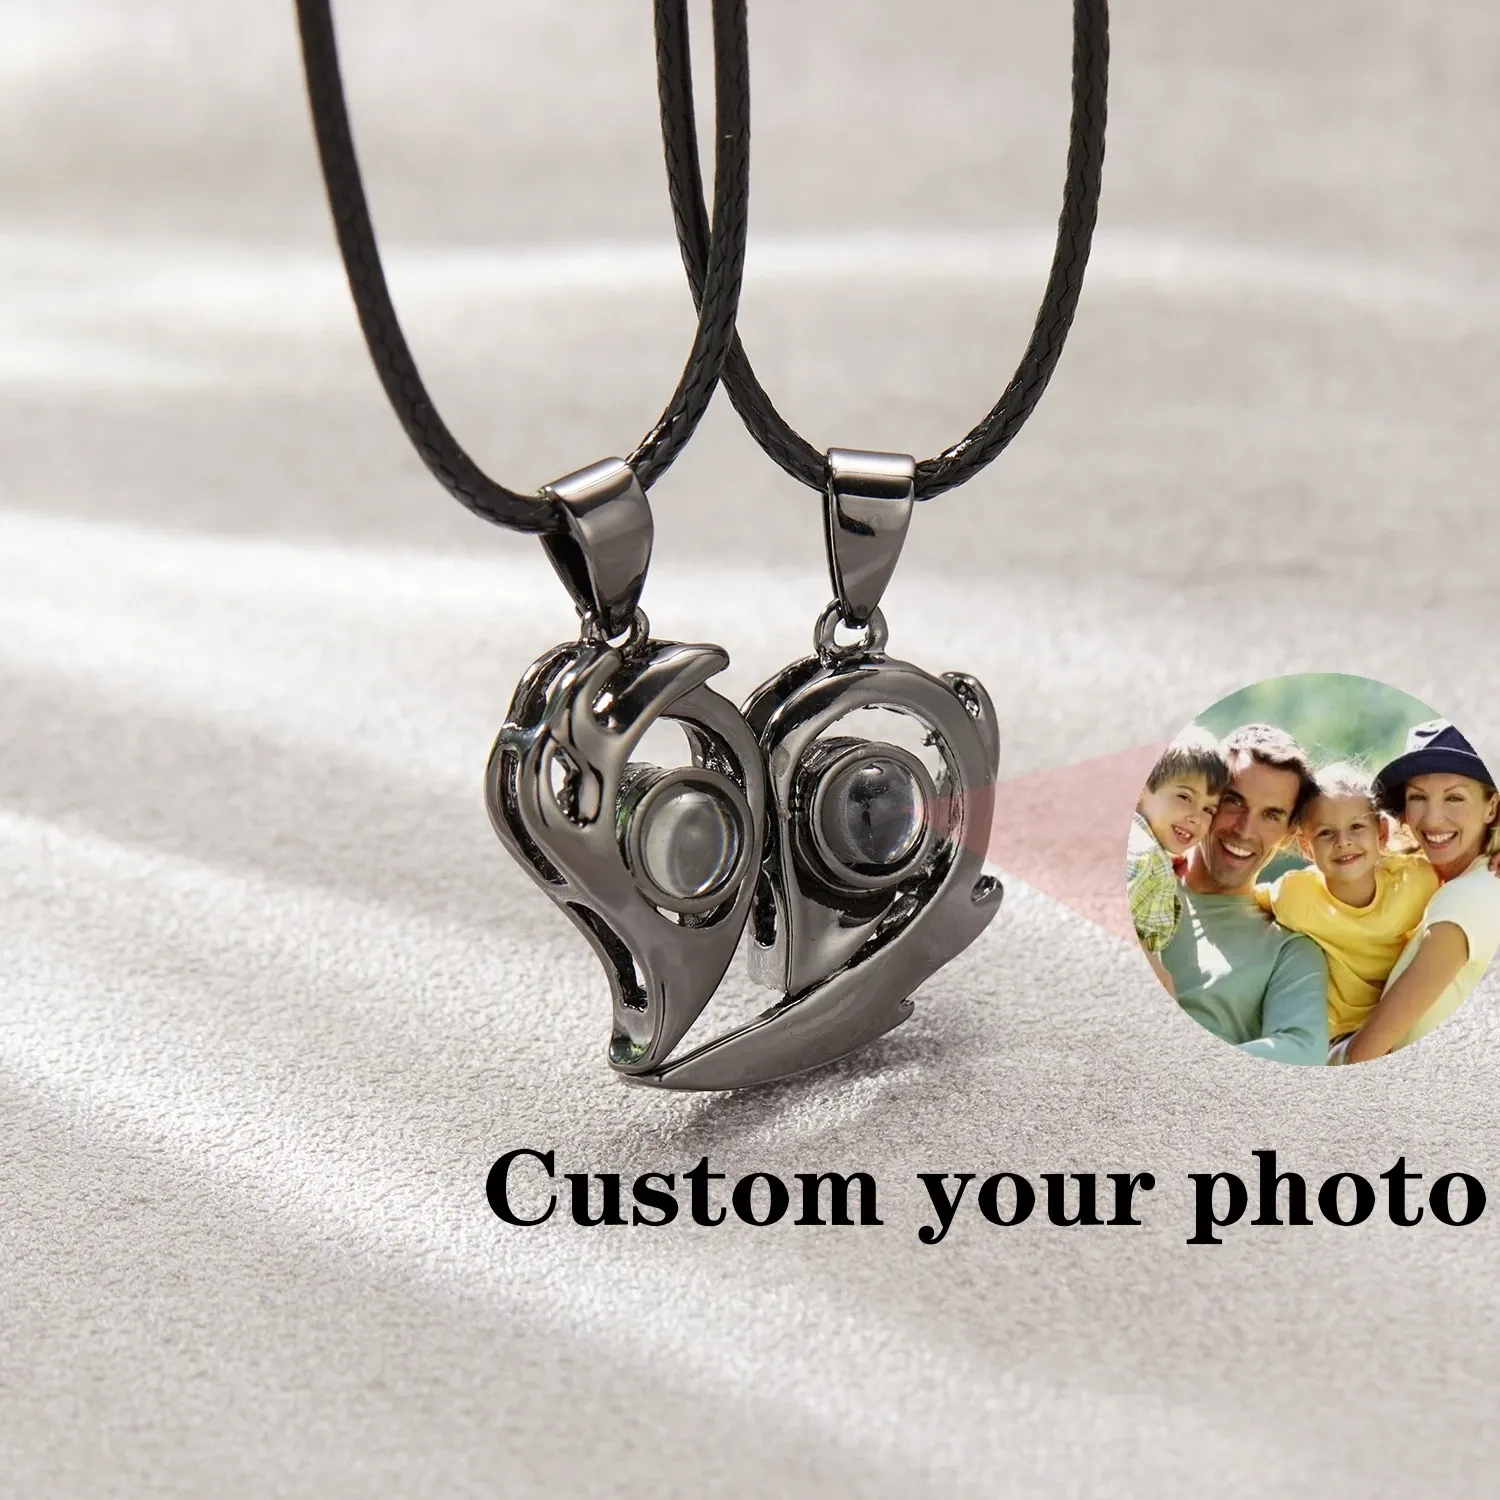 Halsband 1Pair Leather Custom Photo Projection Halsband Magnet Par Colorful Image Heart Pendant Jewelry Lover Personliga gåvor